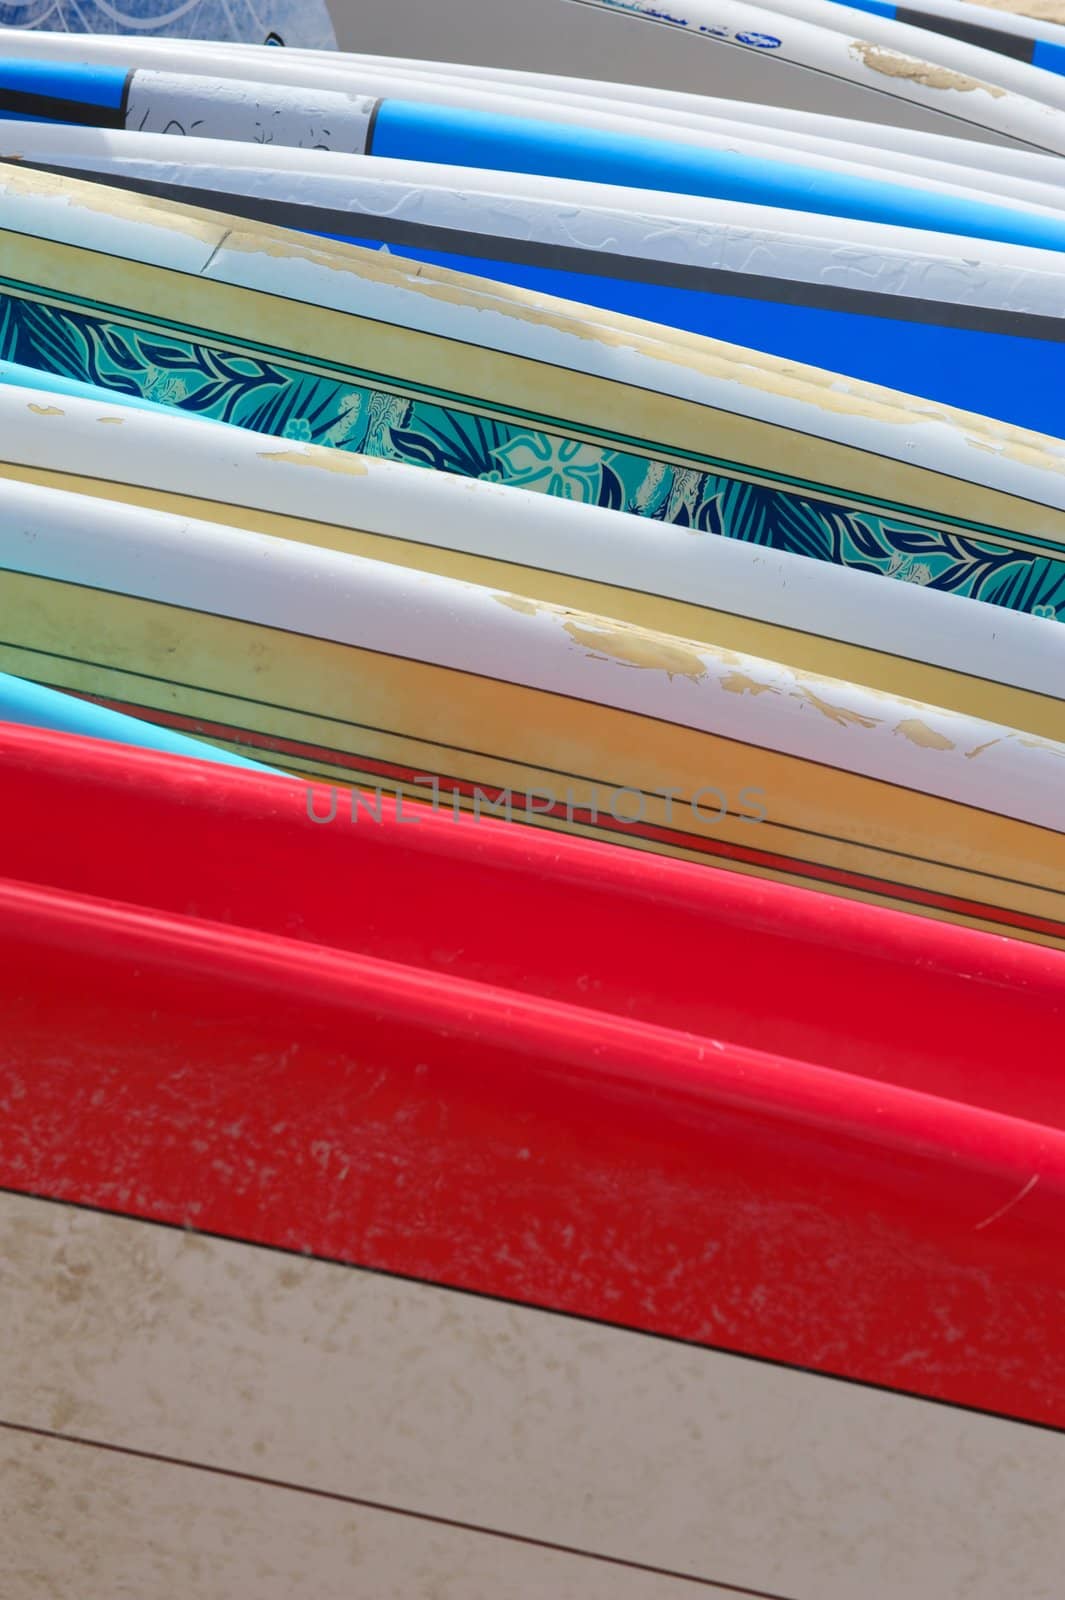 A row of brightly colored renal surfboards laying on the sand in Hawaii